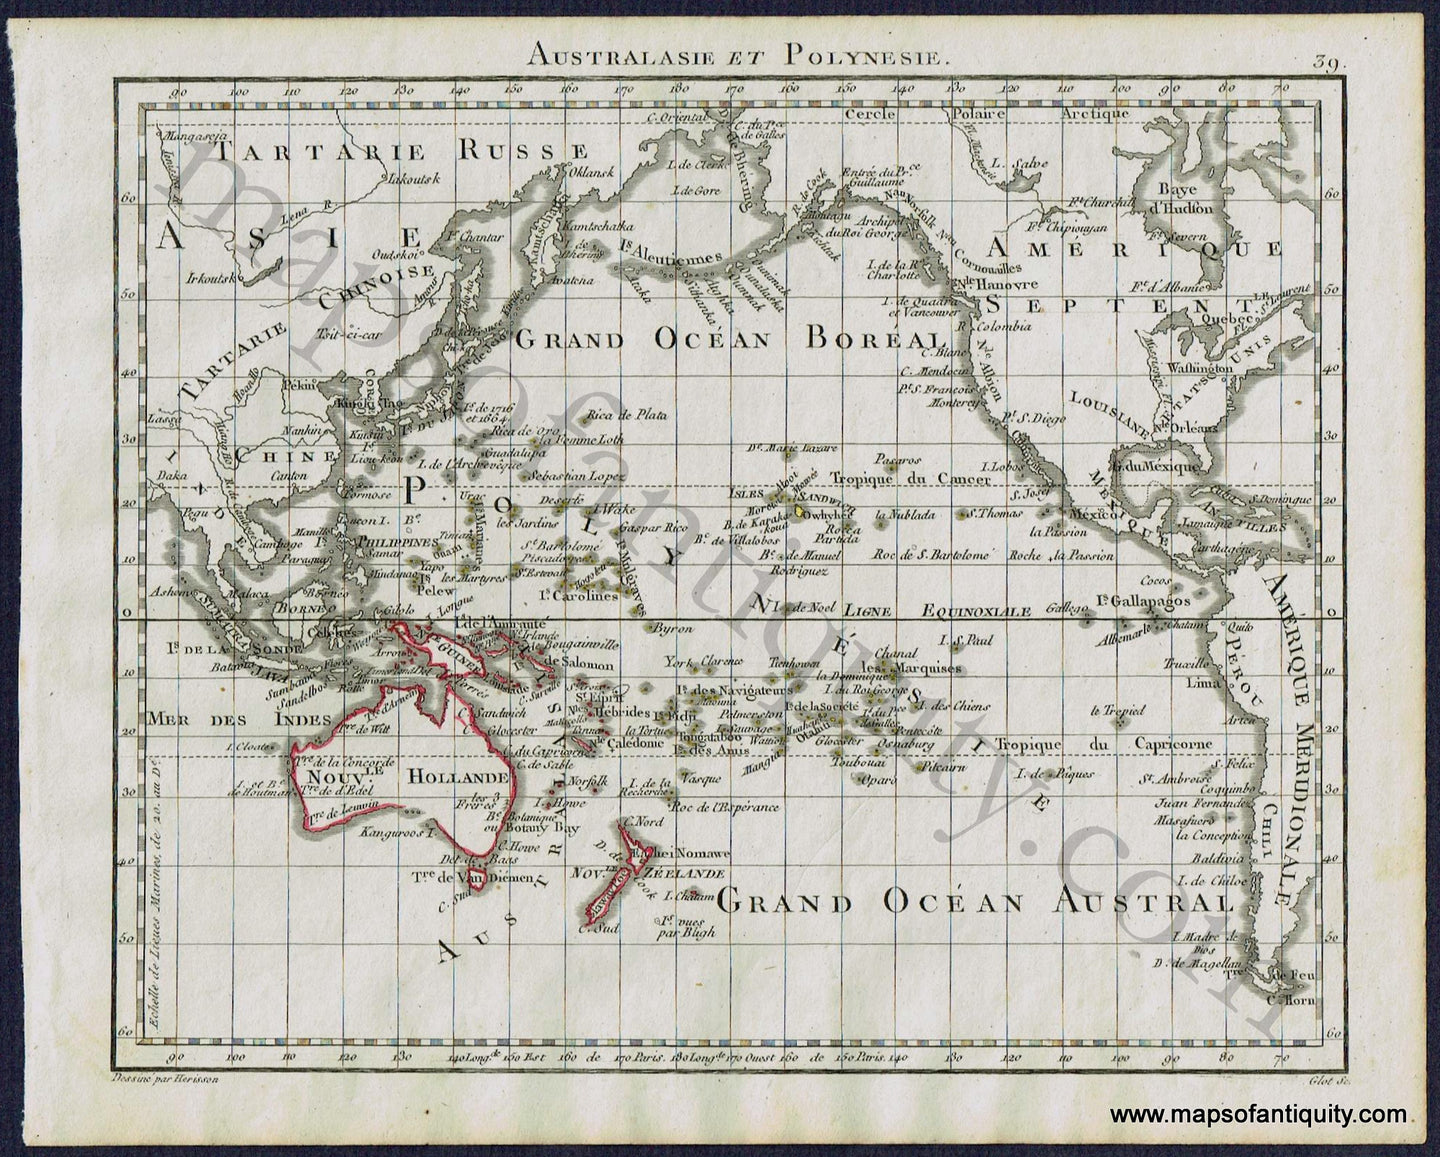 Antique-Map-Oceania-Pacific-Ocean-Oceanica-Polynesia-Pacifica-Australasie-et-Polynesie-Herrison-French-1806-1800s-Early-19th-Century-Maps-of-Antiquity